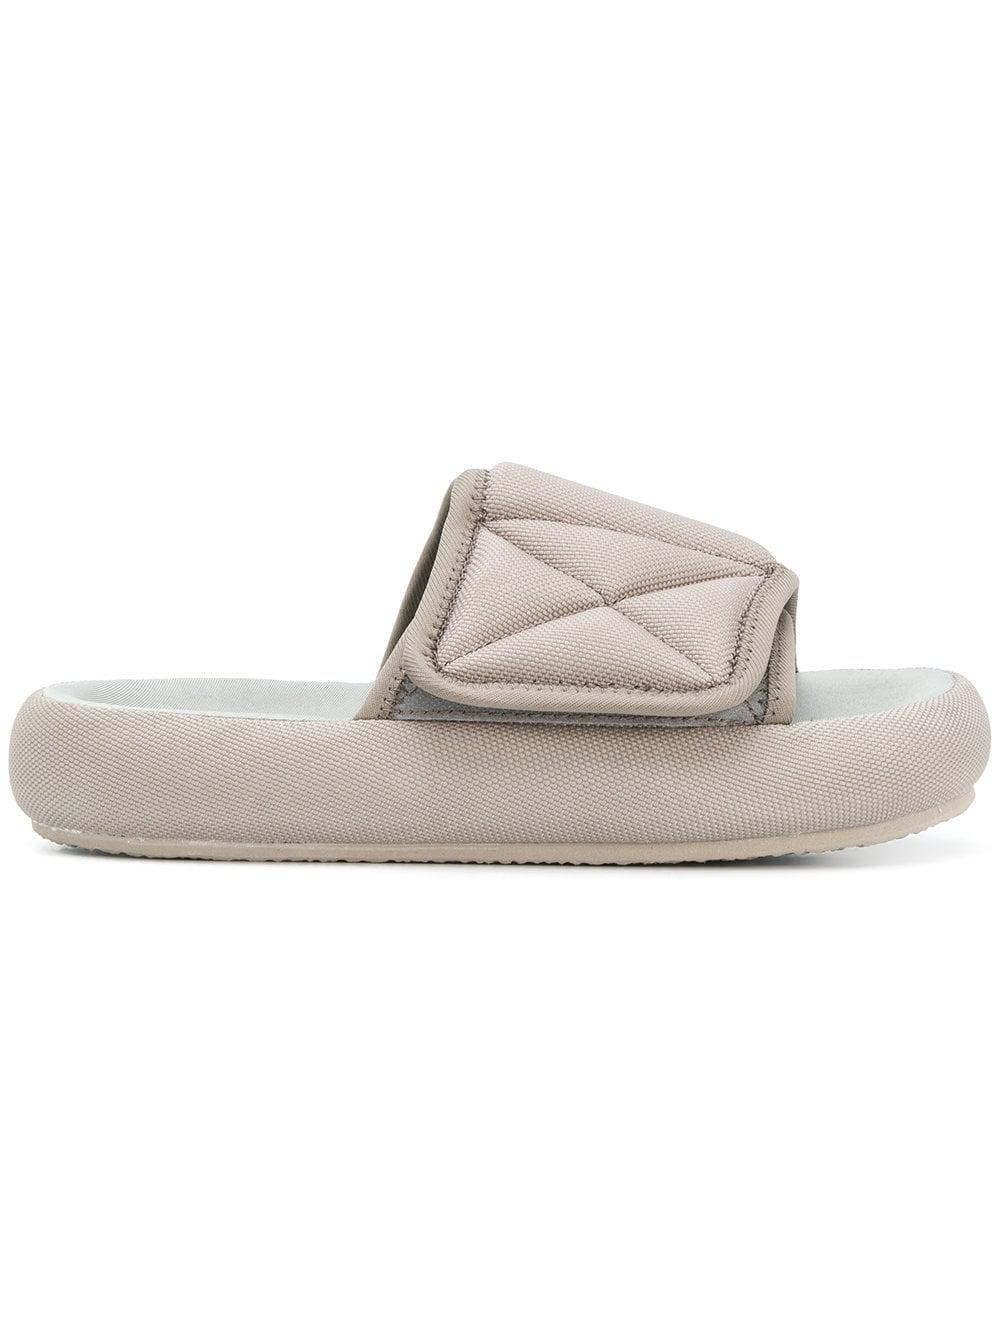 Yeezy Season Slides Online Sale, UP TO 55% OFF